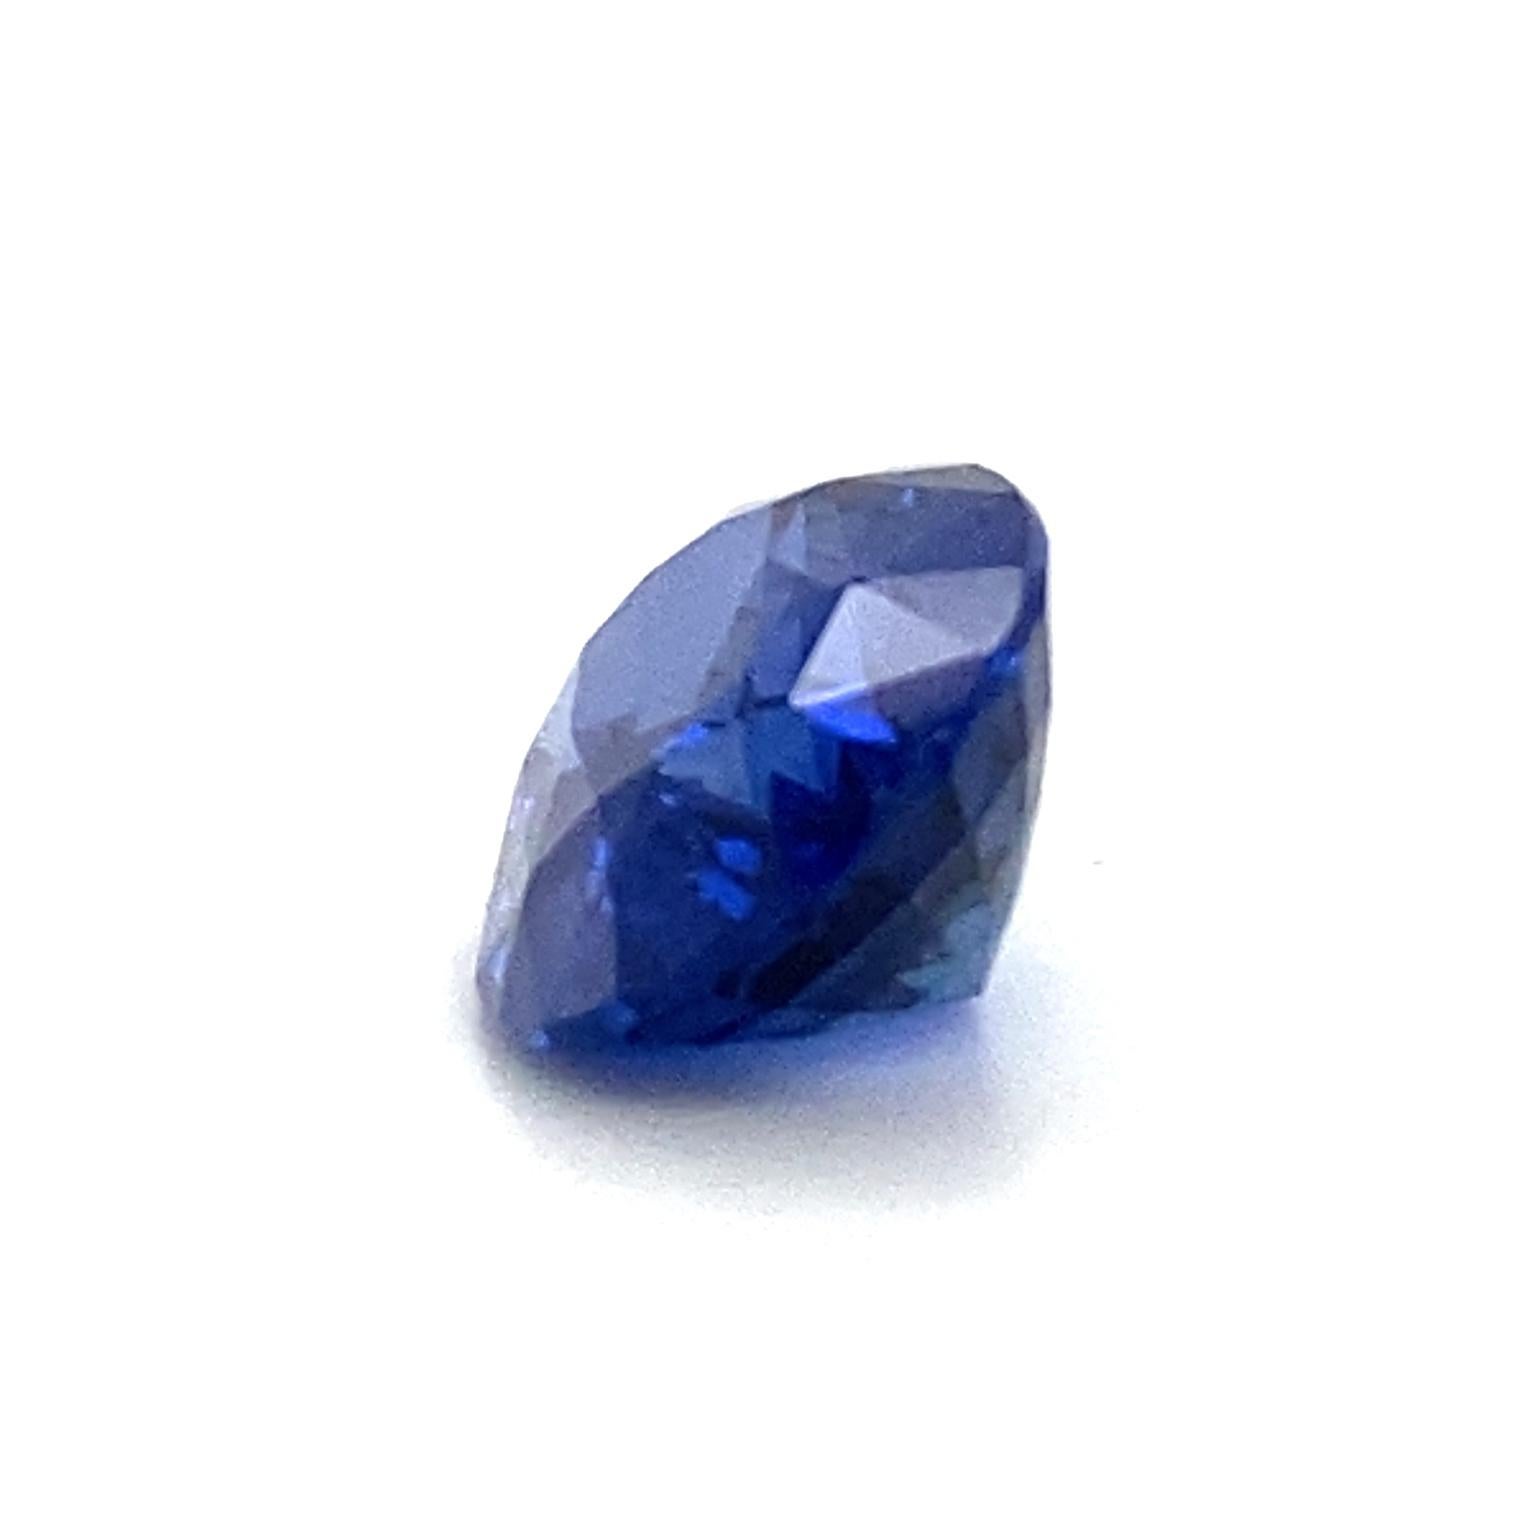 Valentin Magro Oval Sapphire demonstrates why its cut is popular. The gem has been fashioned into a mixed cut, with a brilliant cut crown and step cut pavilion. Its oval shape, combined with the cut proportions, ensure the sapphire is neither too